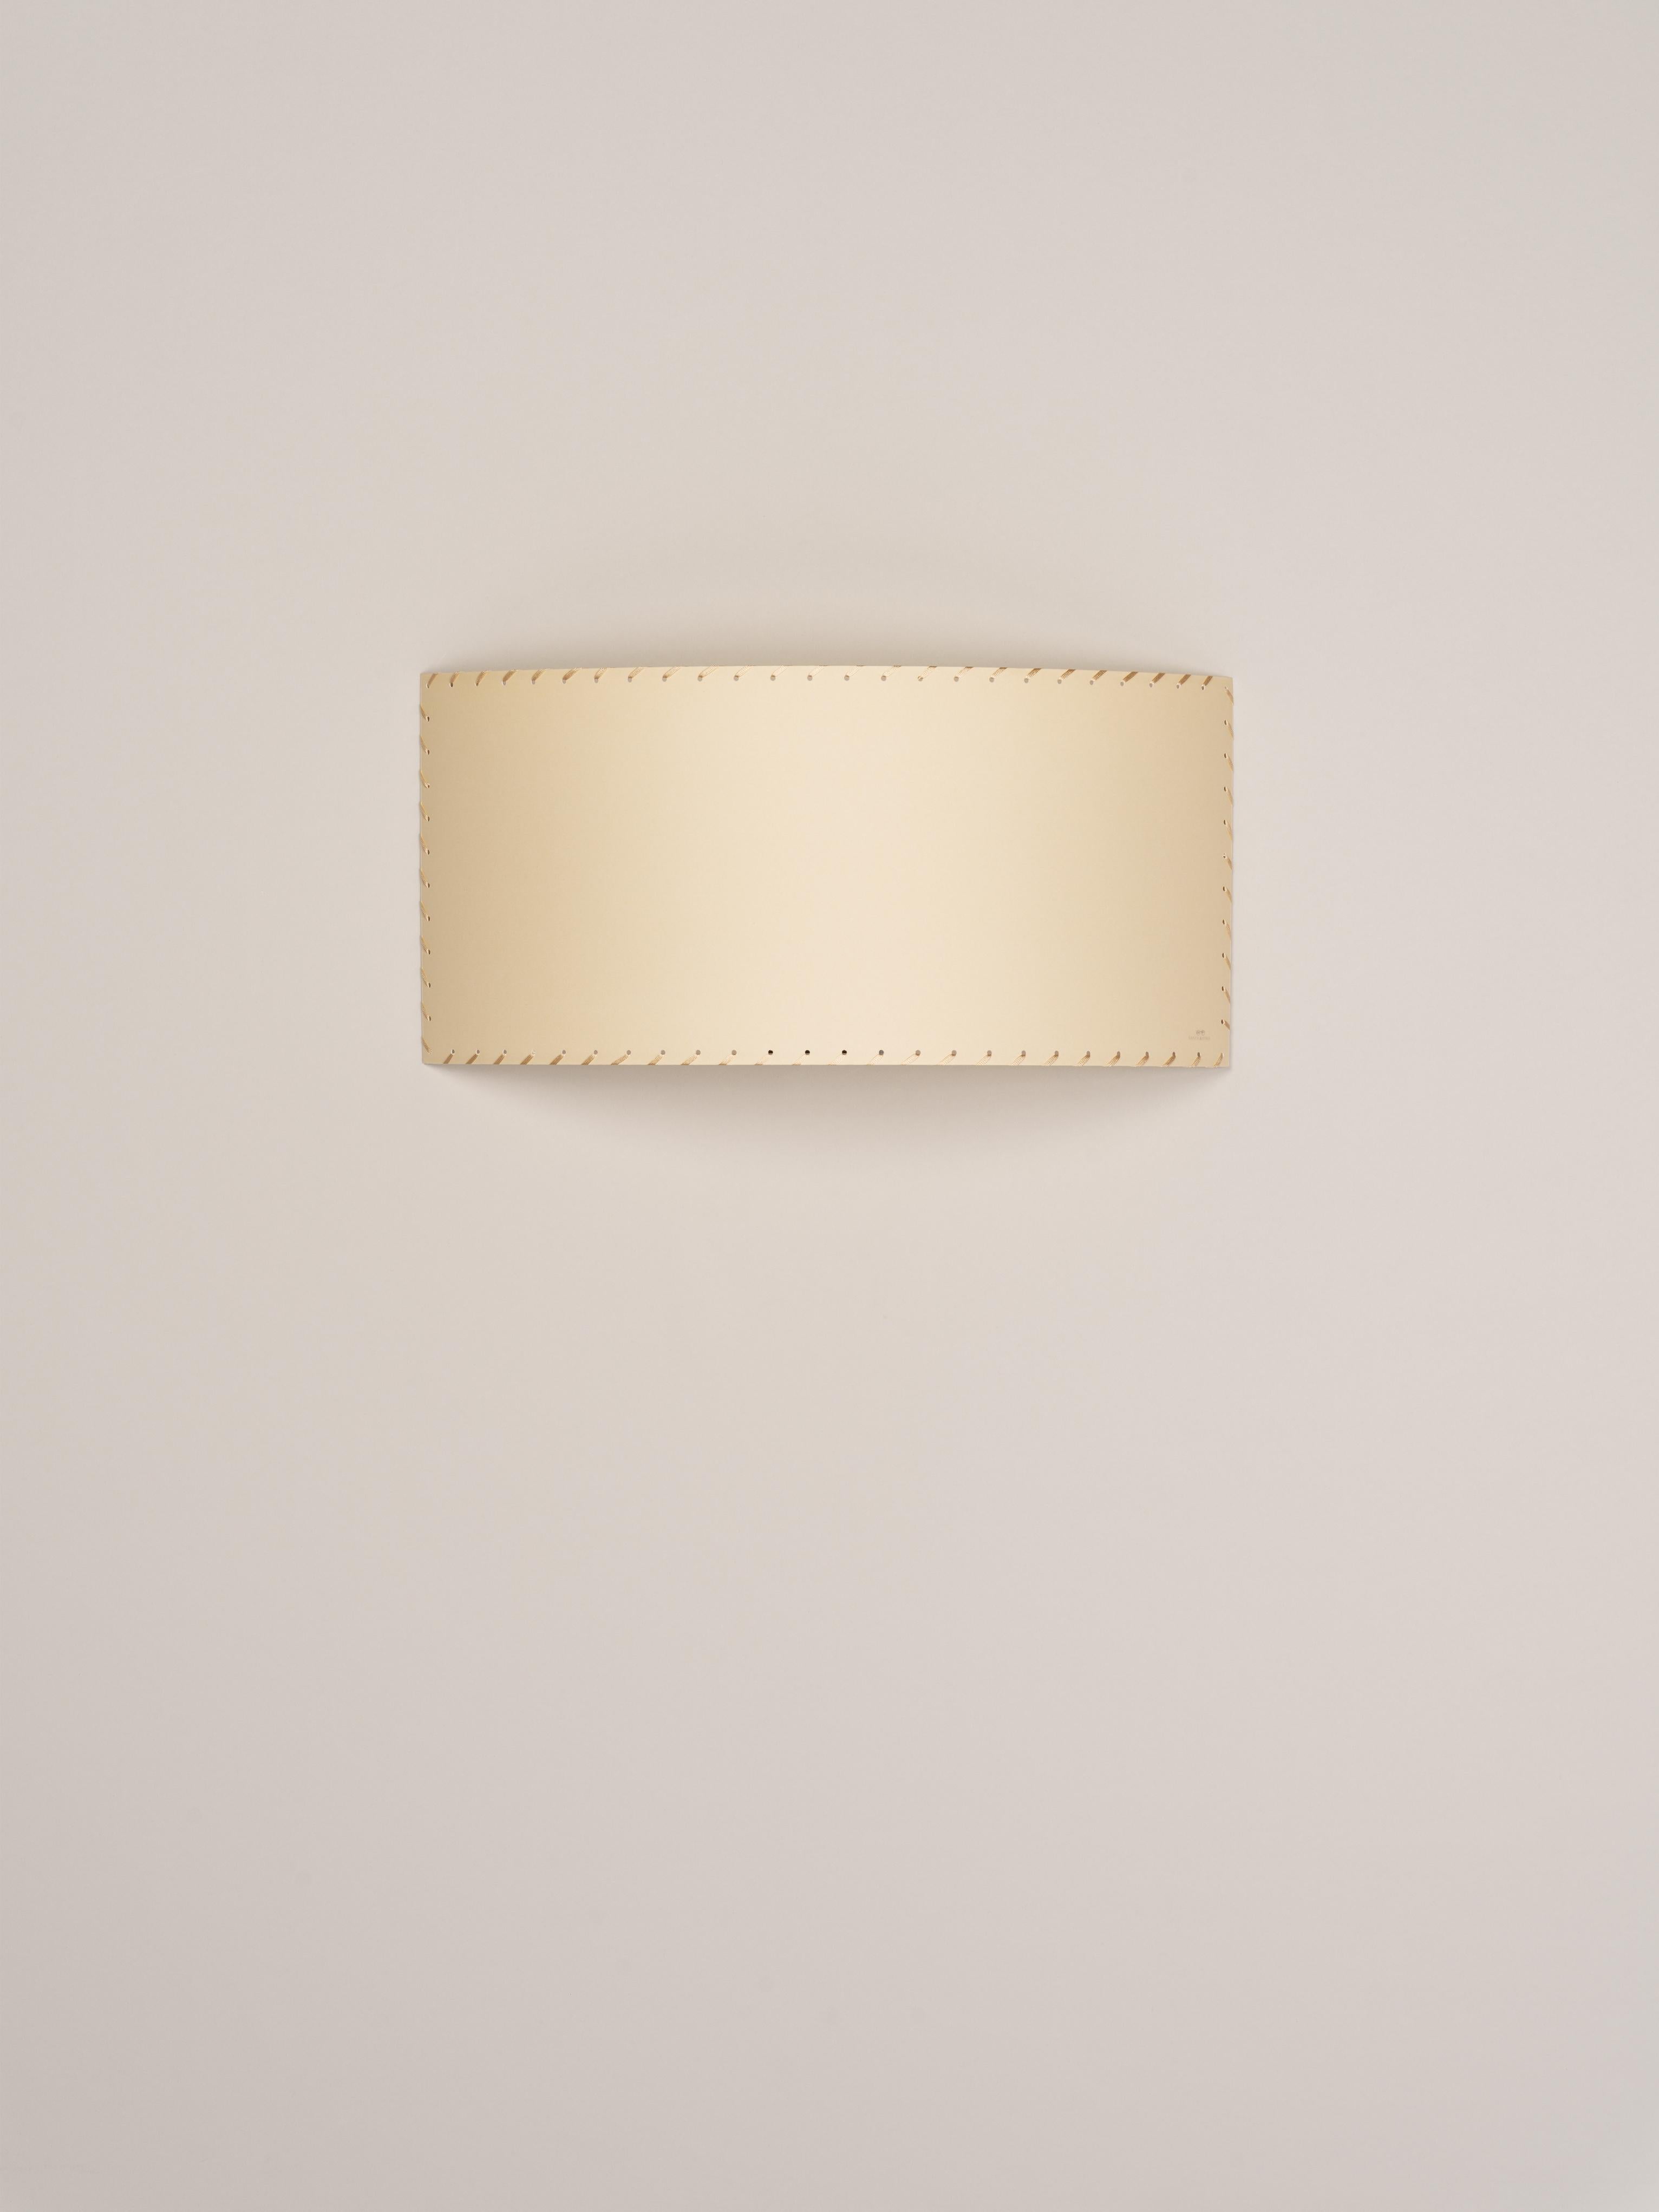 Beige Comodín rectangular wall lamp by Santa & Cole
Dimensions: D 50 x W 13 x H 24 cm
Materials: Metal, stitched parchment.

This minimalist wall lamp humanises neutral spaces with its colourful and functional sobriety. The shade is fondly